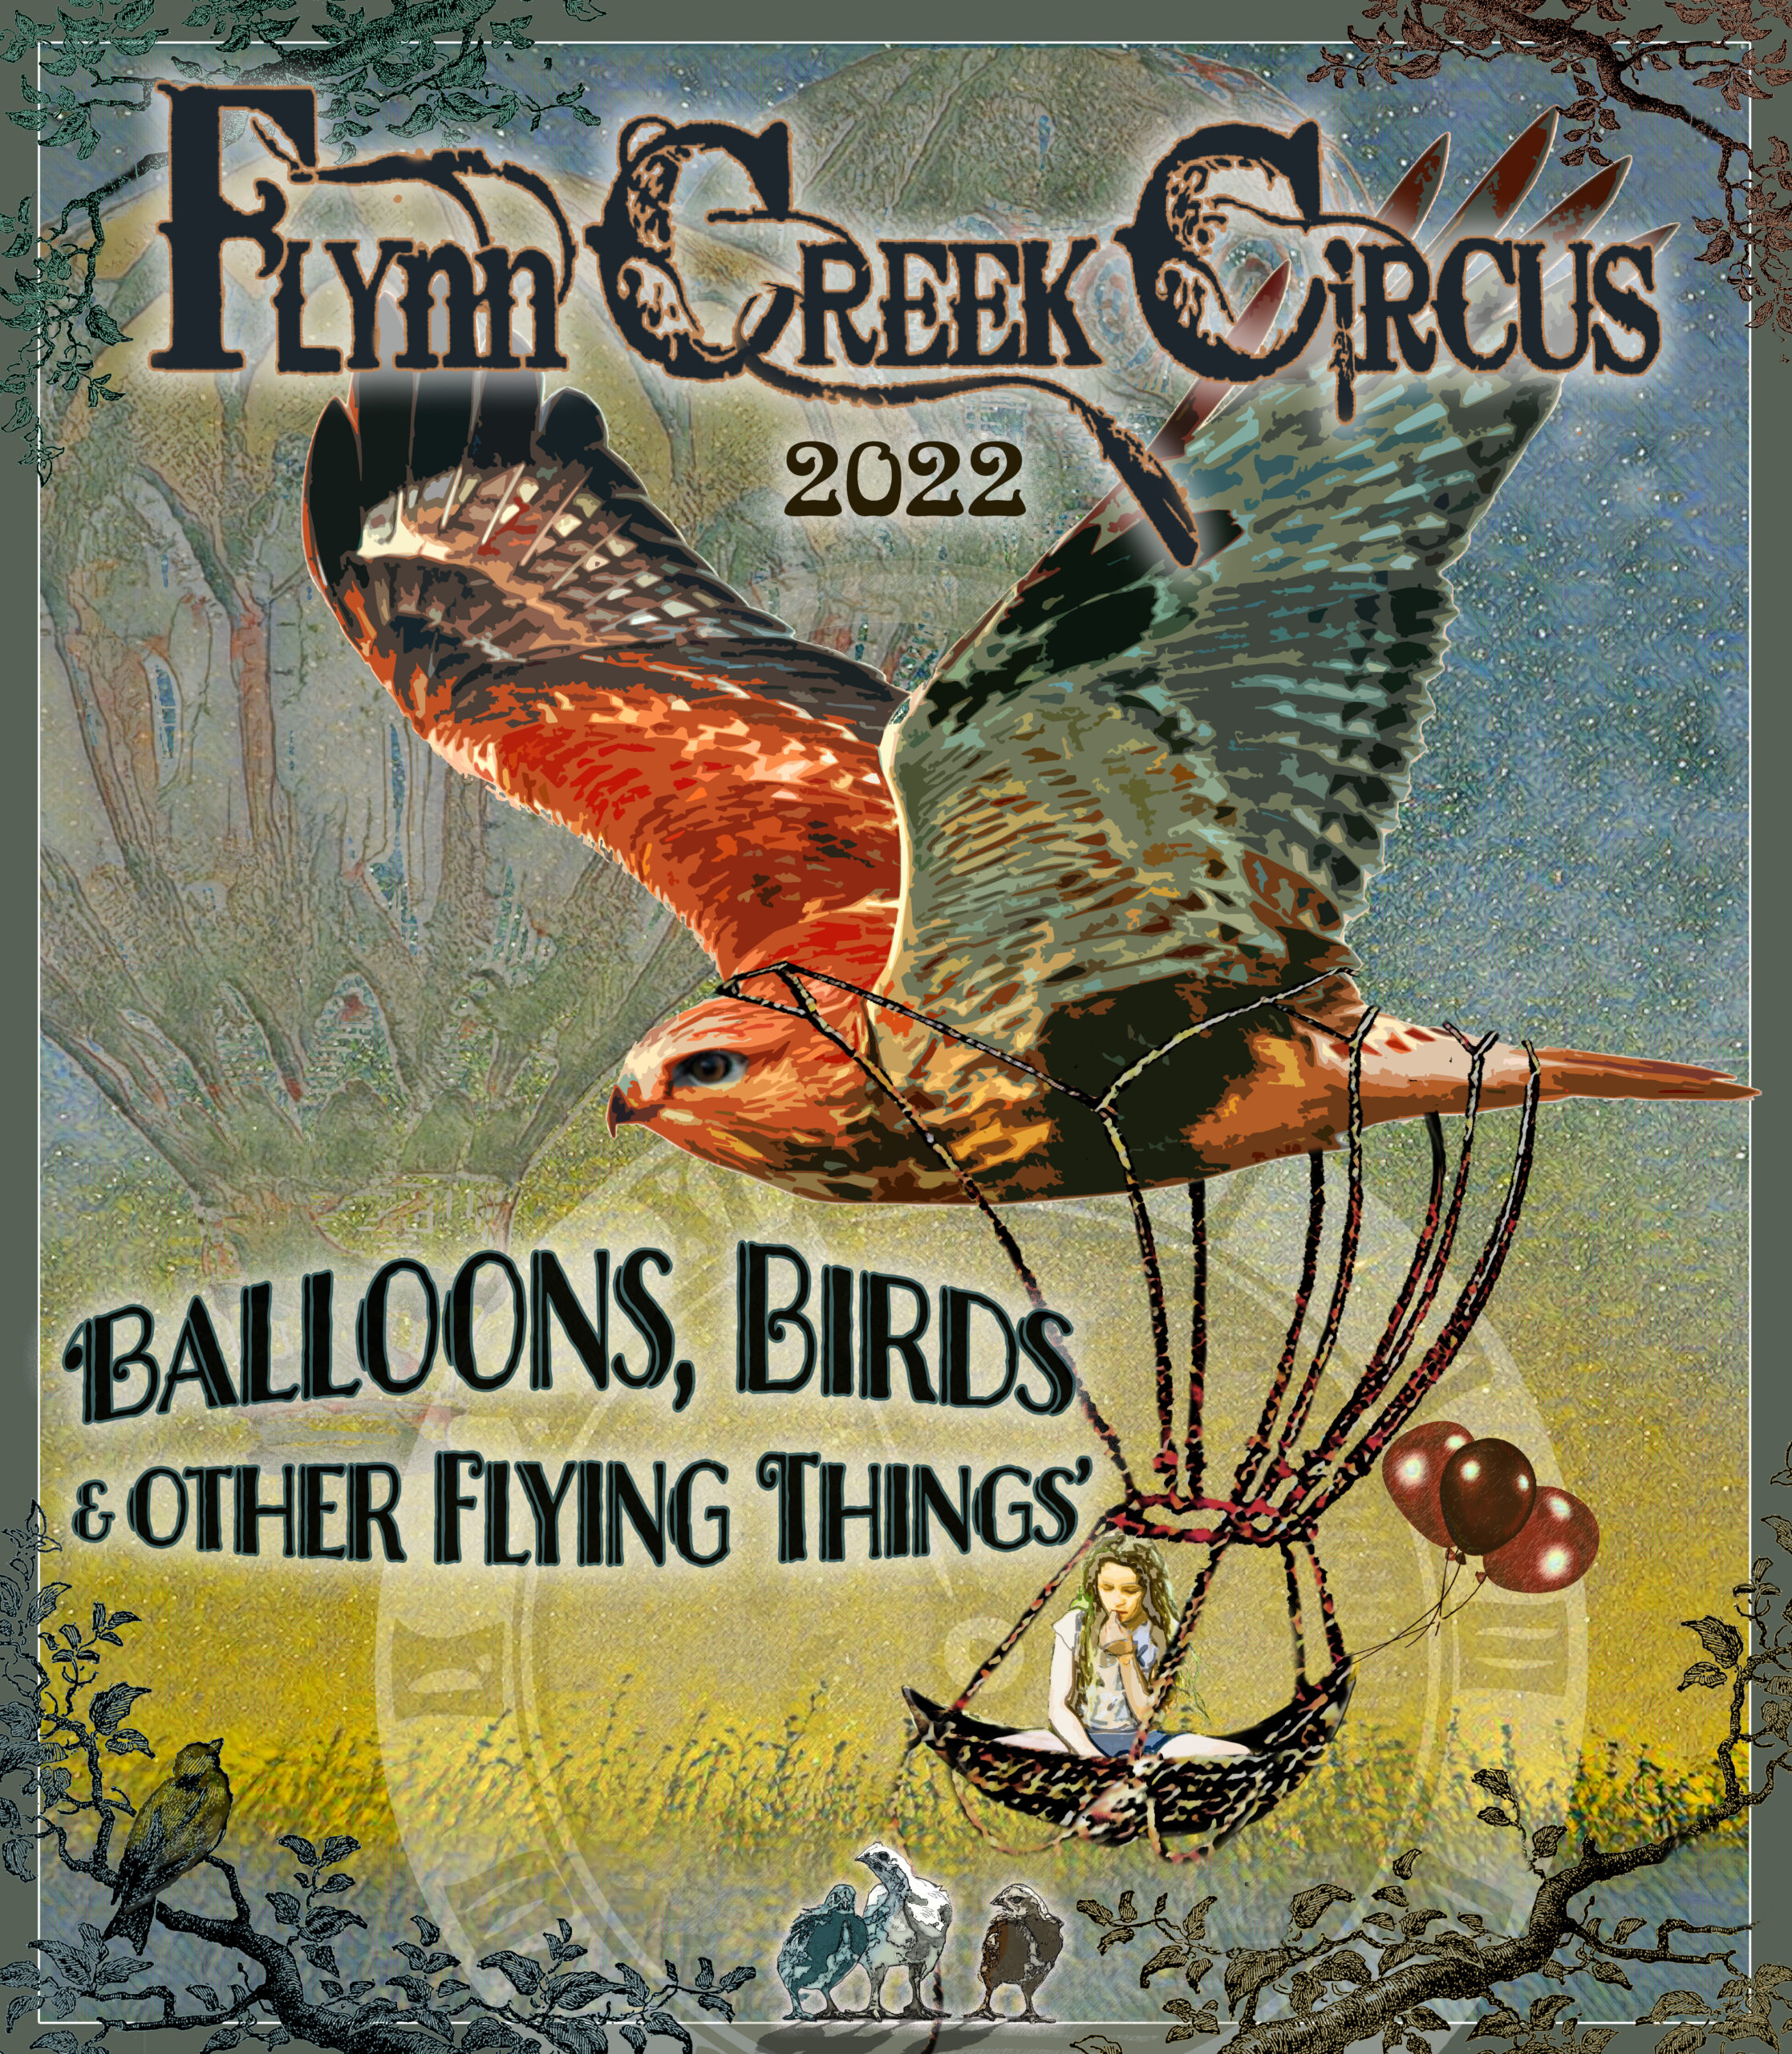 The Amazing Flynn Creek Circus Comes To Amador County 6